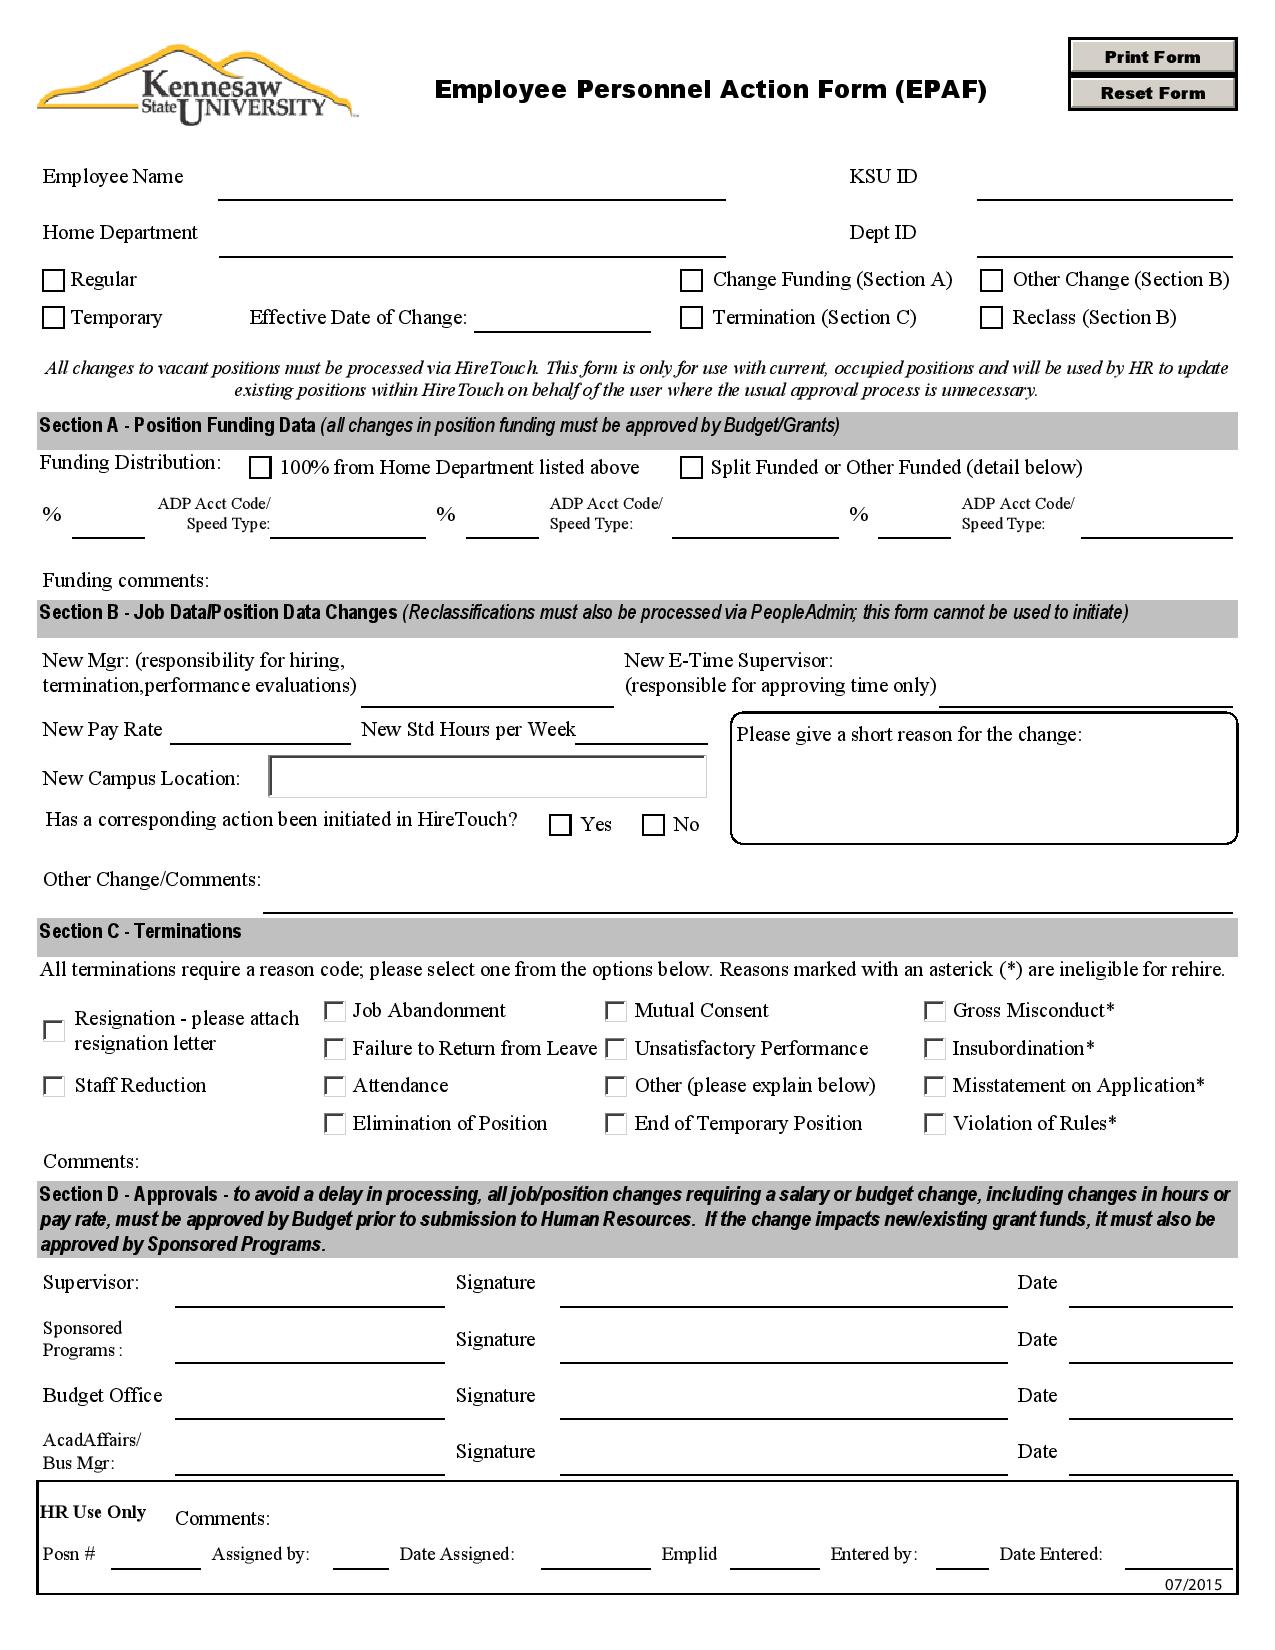 employee personnel action form epaf page 001